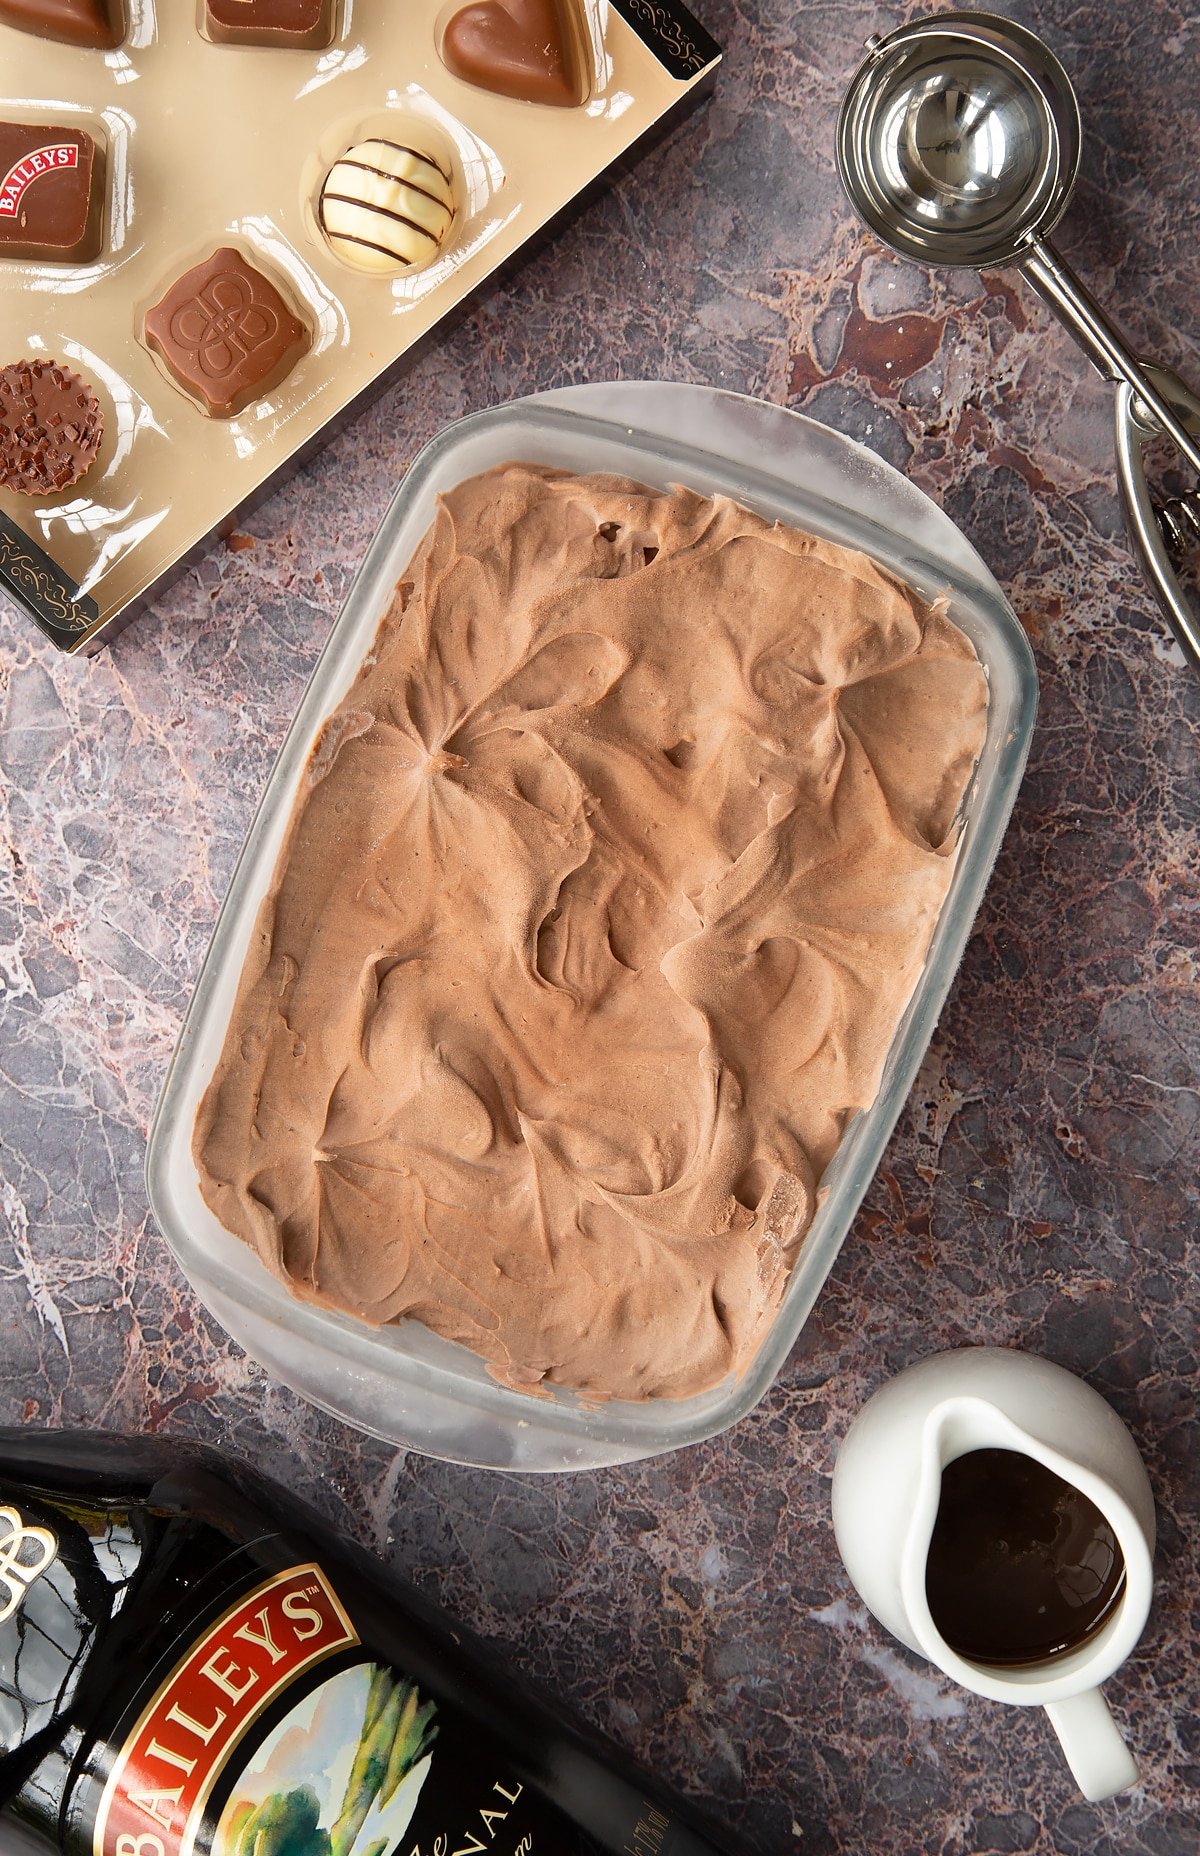 bailey ice cream mixture in a frozen pyrex dish with baileys chocolates at the side.